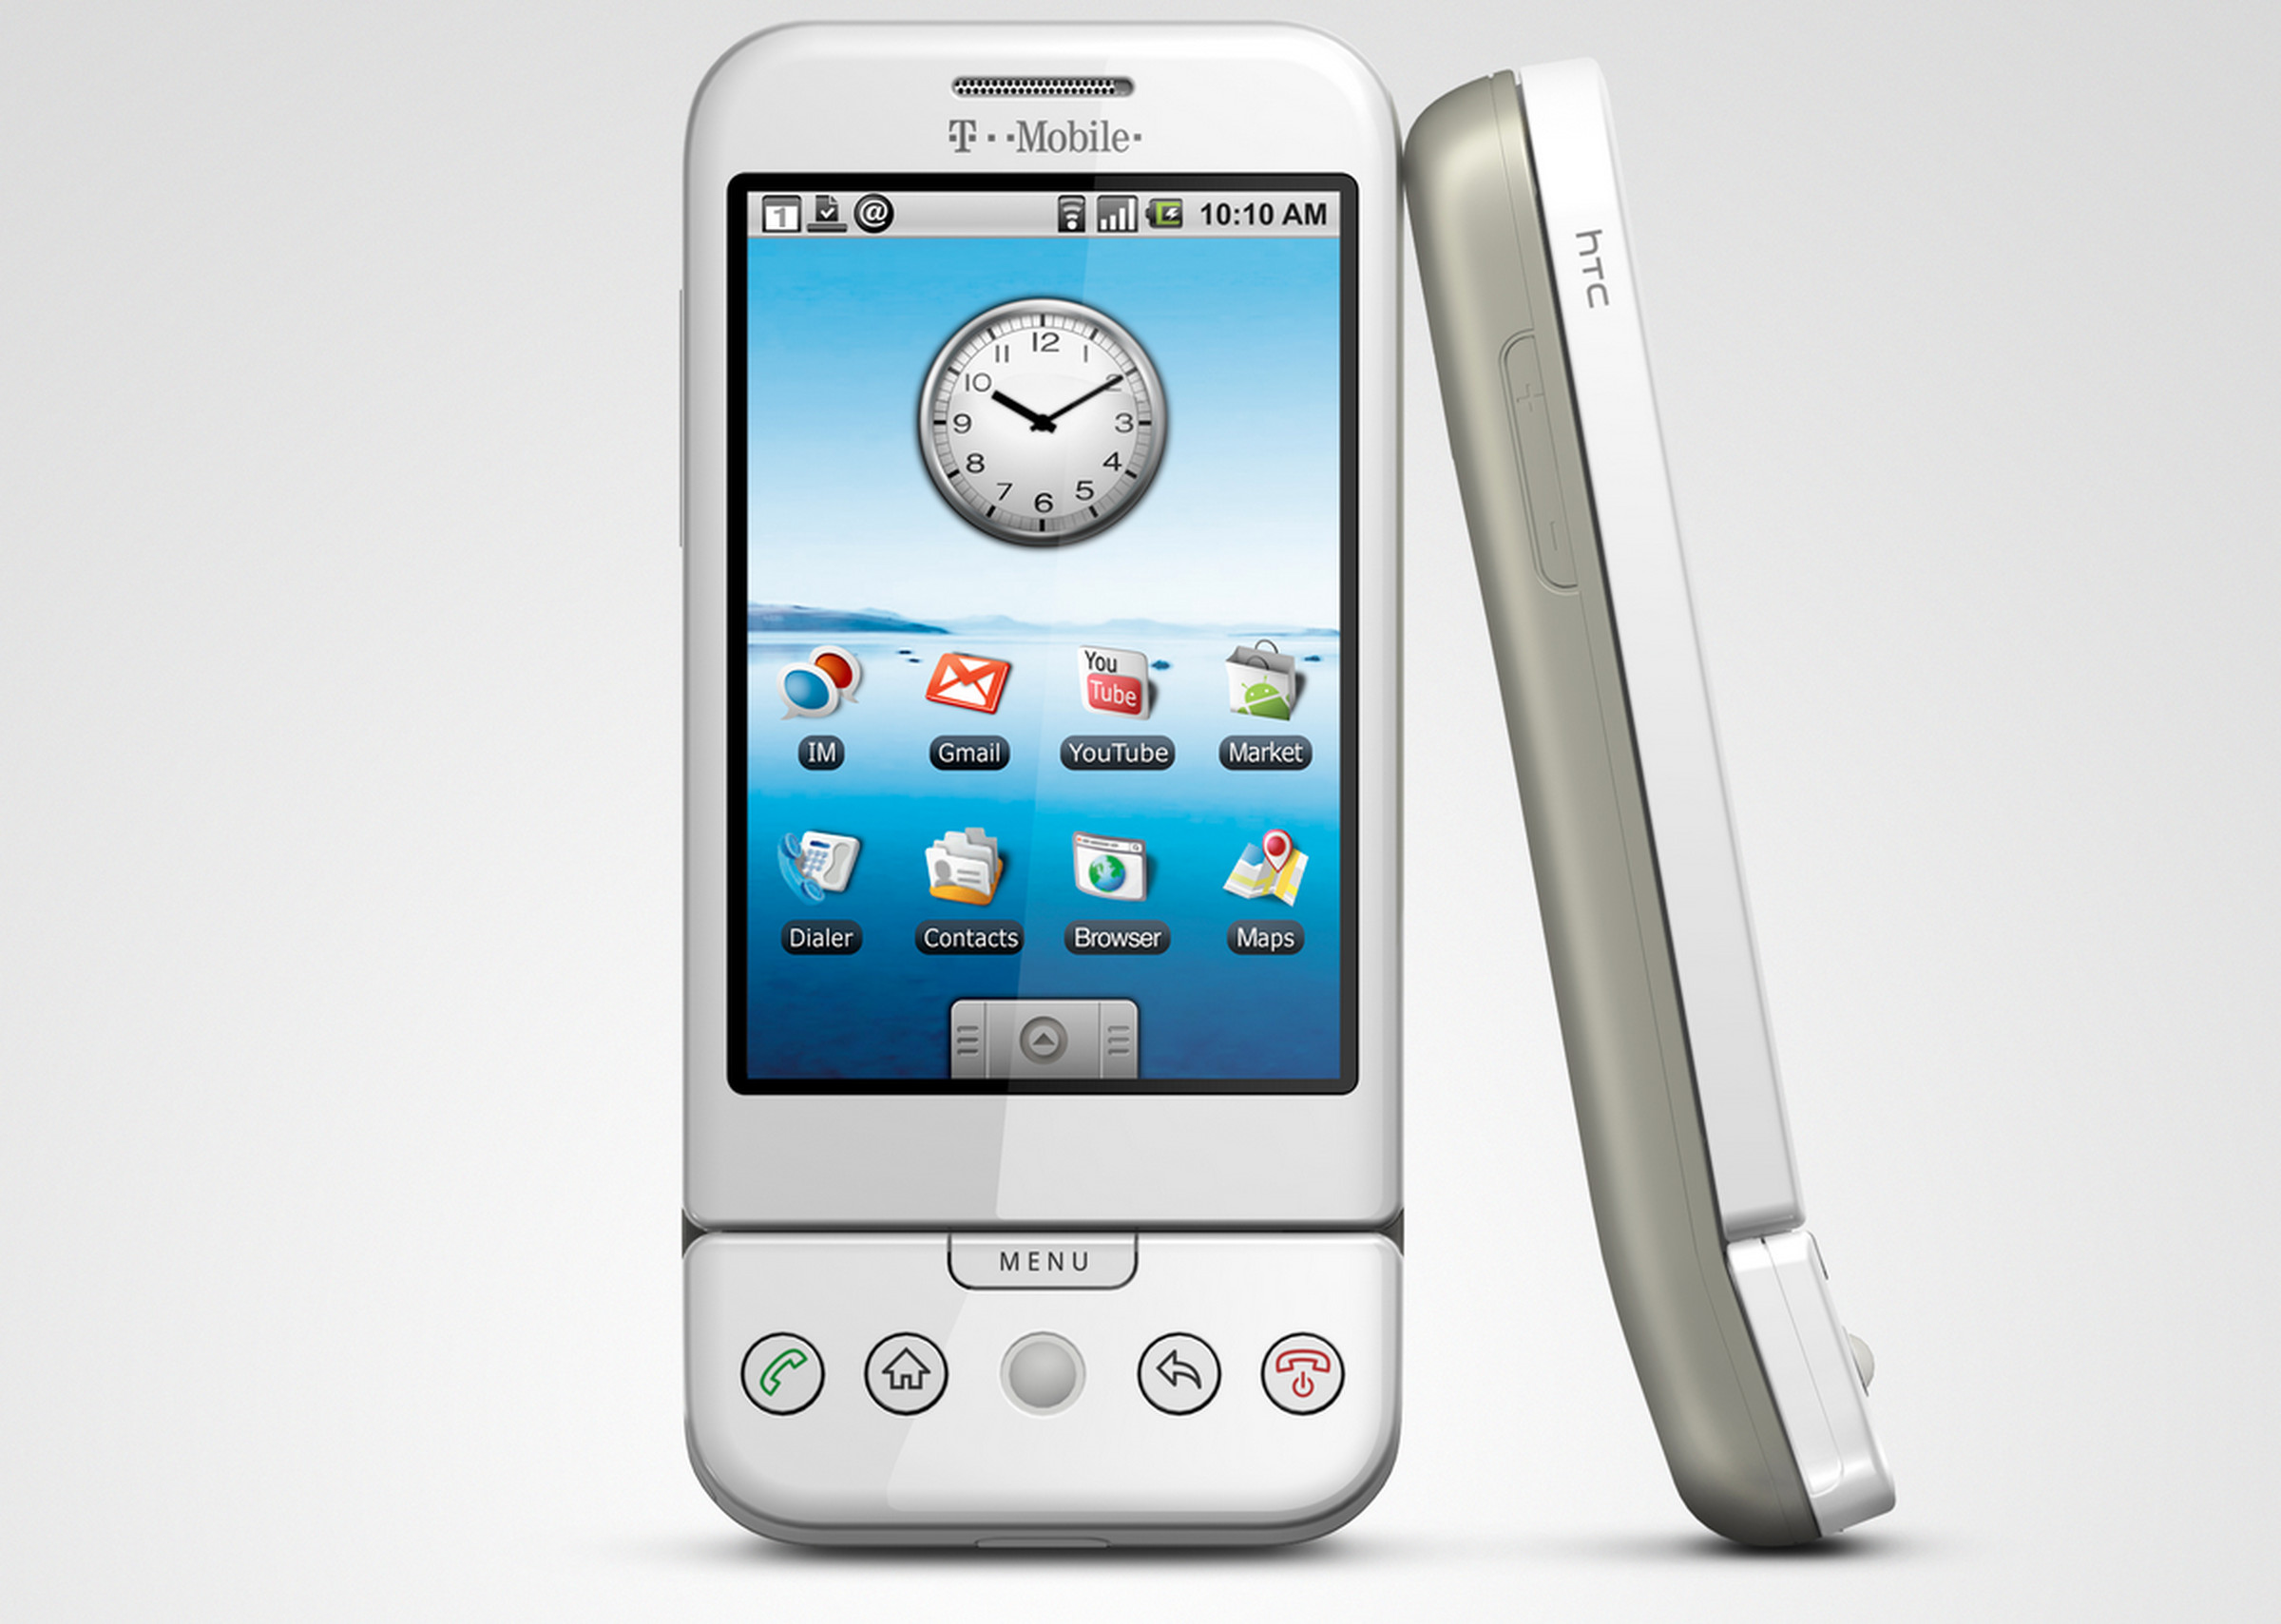 HTC’s T-Mobile G1 was the first-ever commercially released Android smartphone in the US.